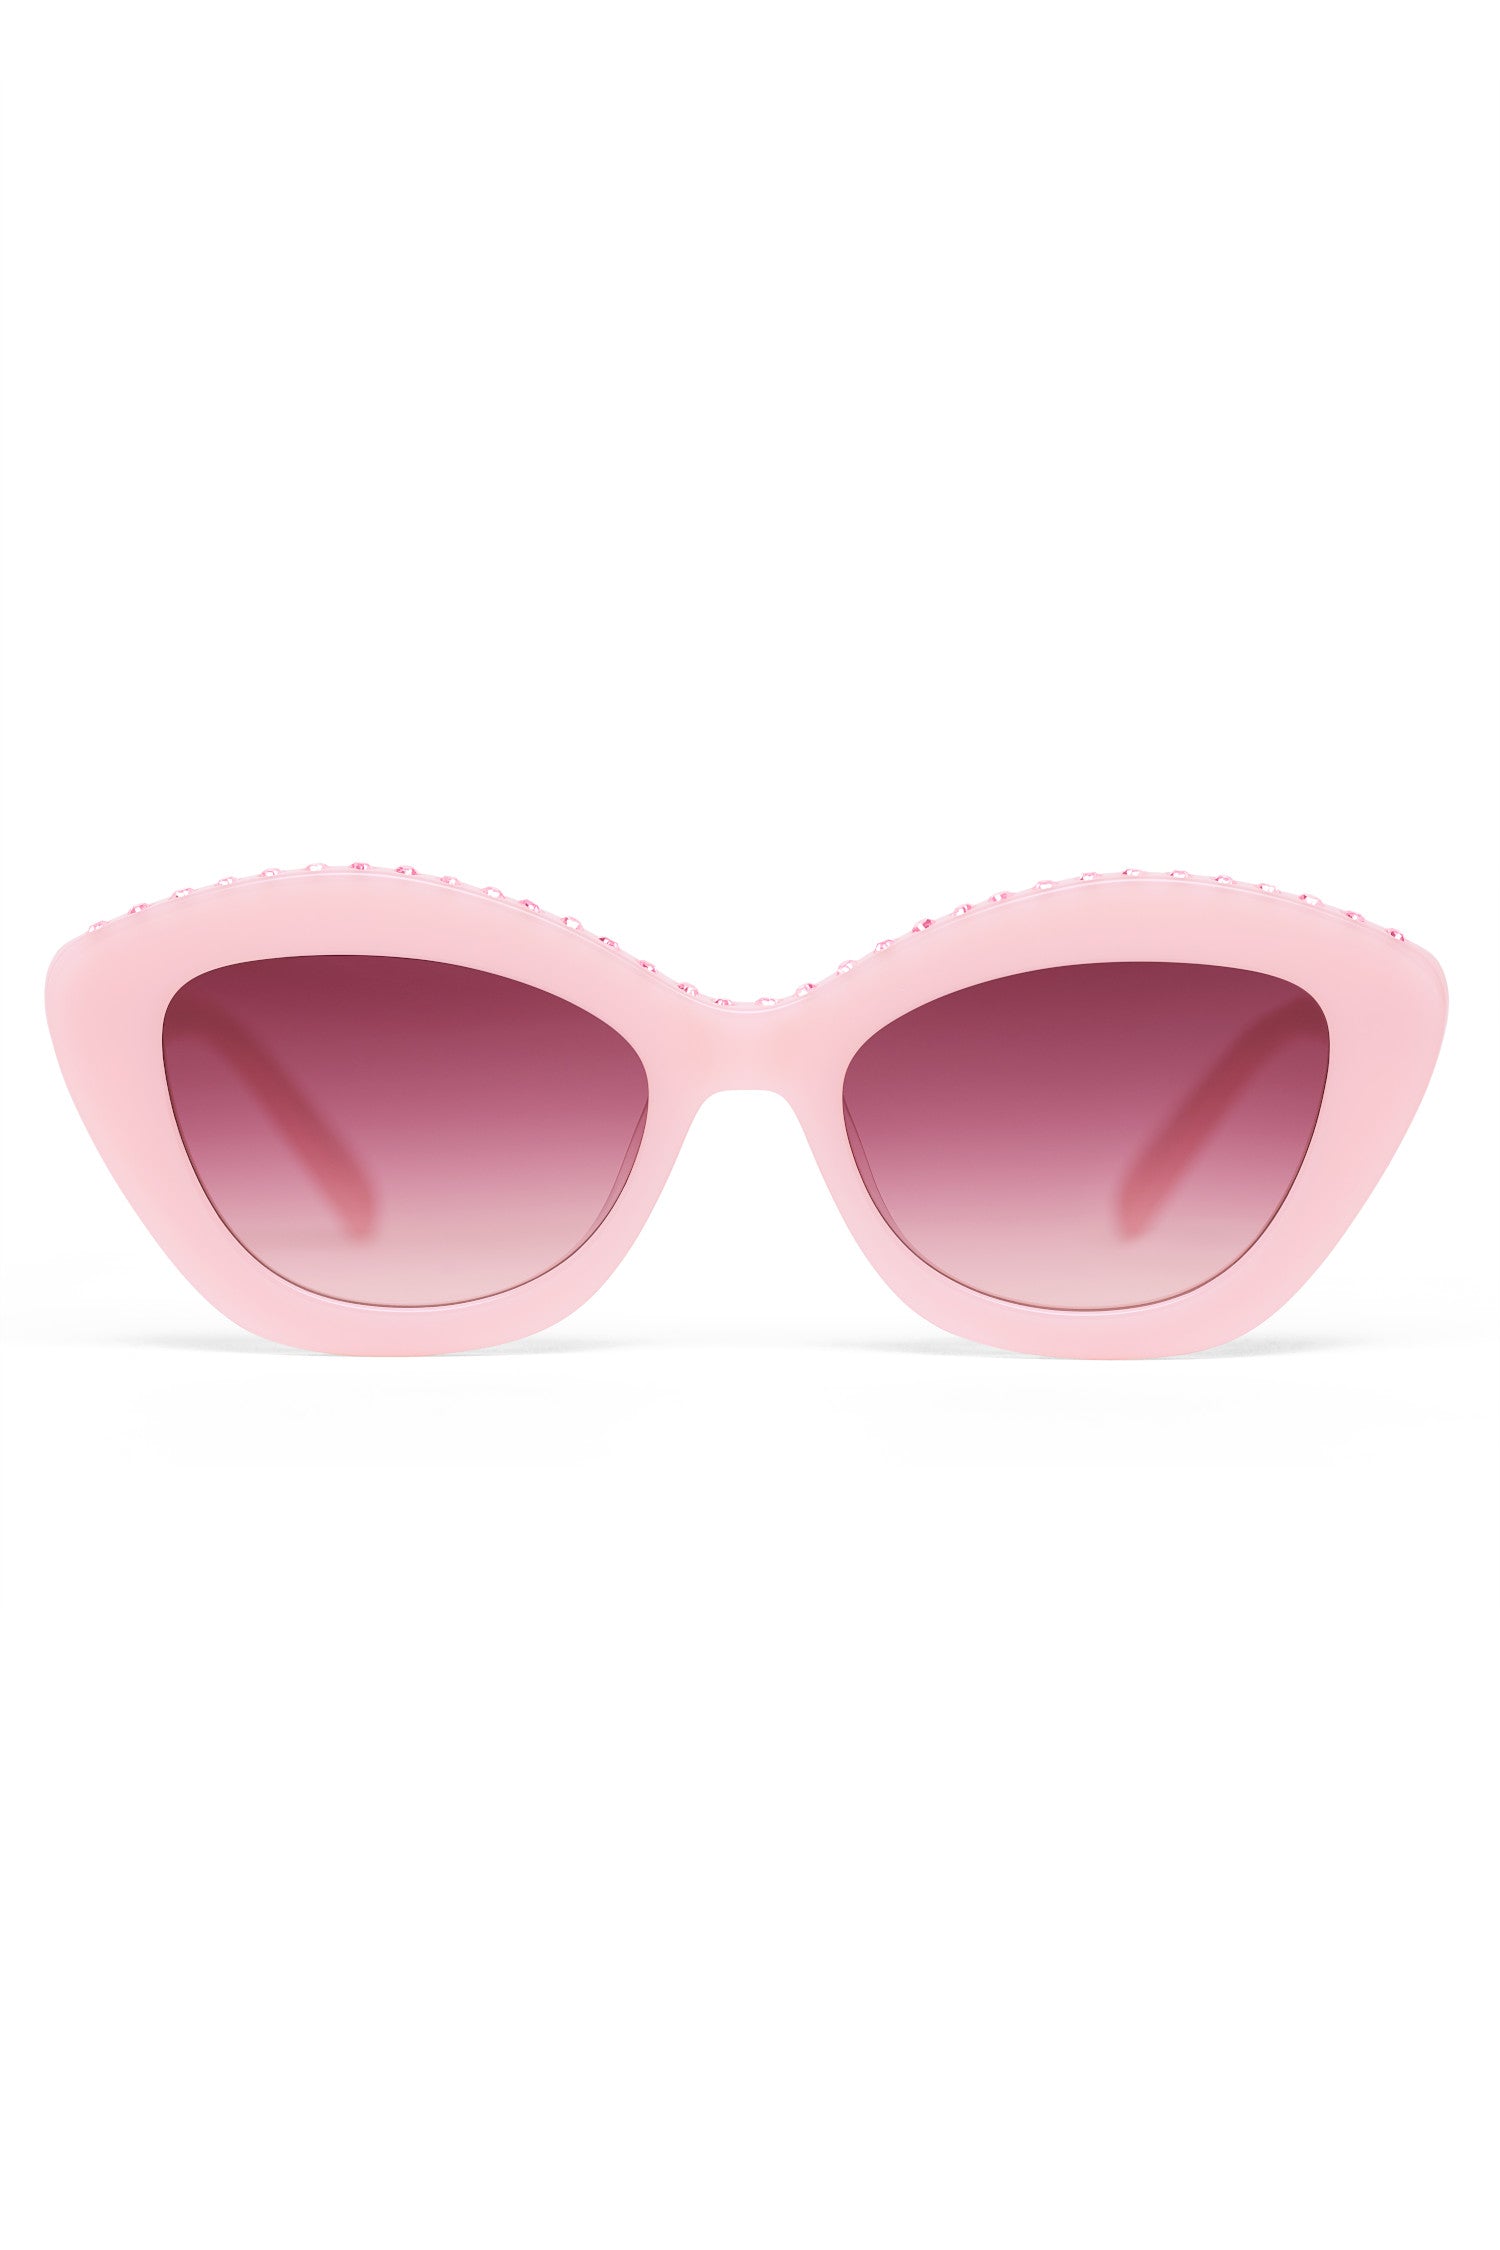 Pink Cat Eye Sunglasses with Rhinestones on top across bridge of nose and eyes.